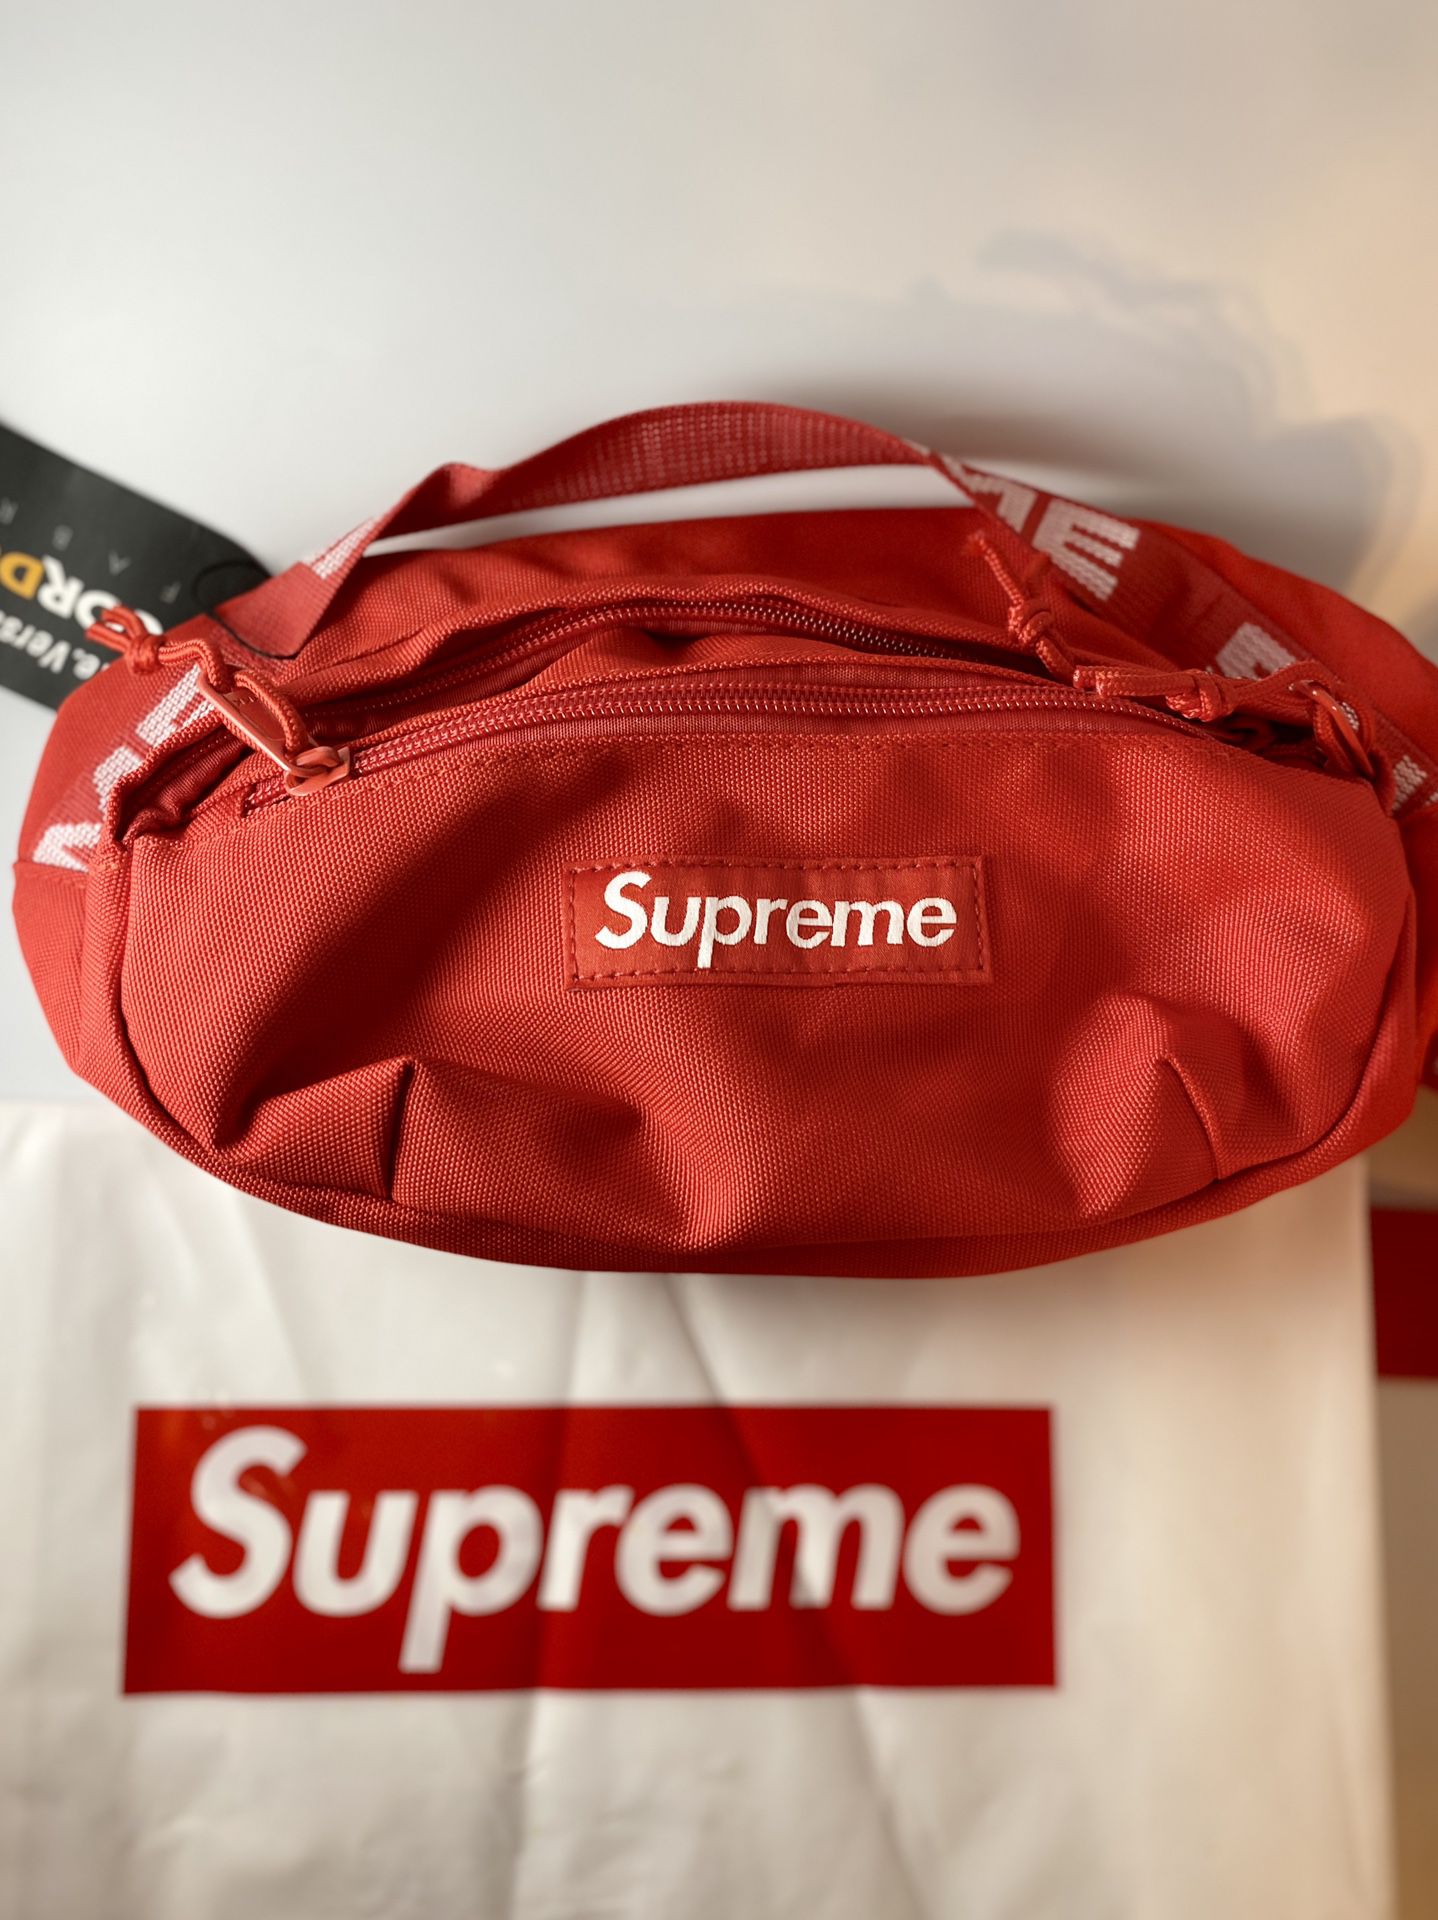 Supreme Waist Bag (SS21) for Sale in The Bronx, NY - OfferUp